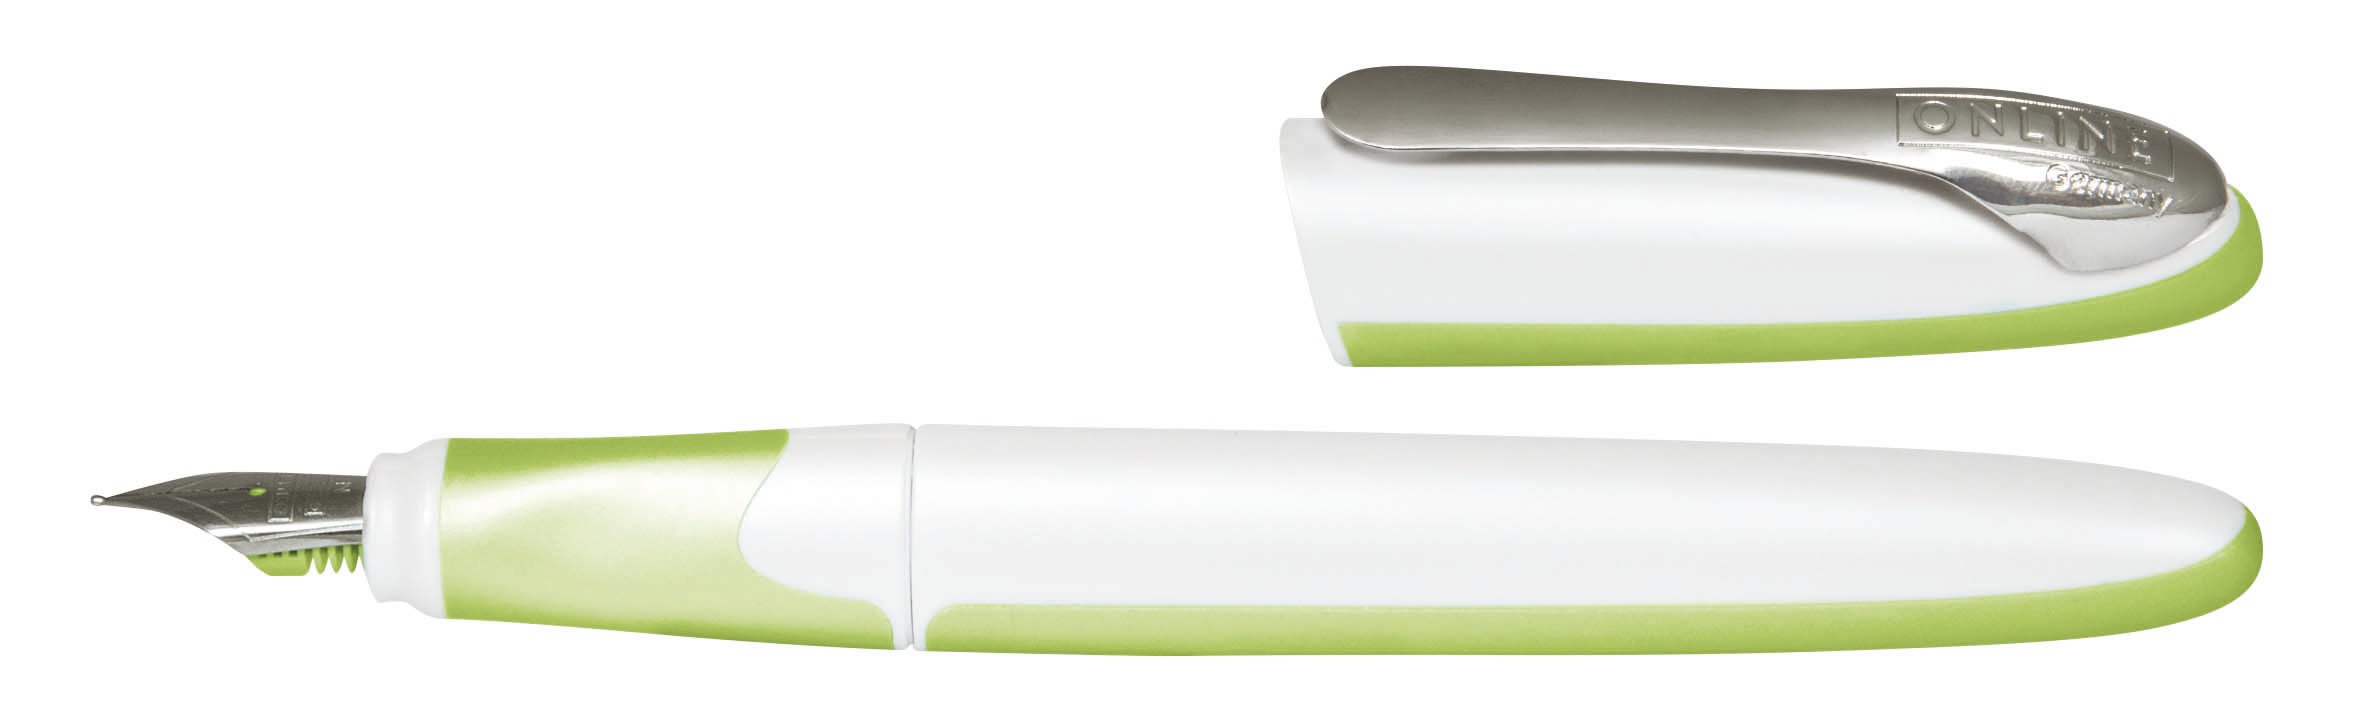 ONLINE Stylo plume Air 0.5mm 20144/3D Pastel Green Pastel Green